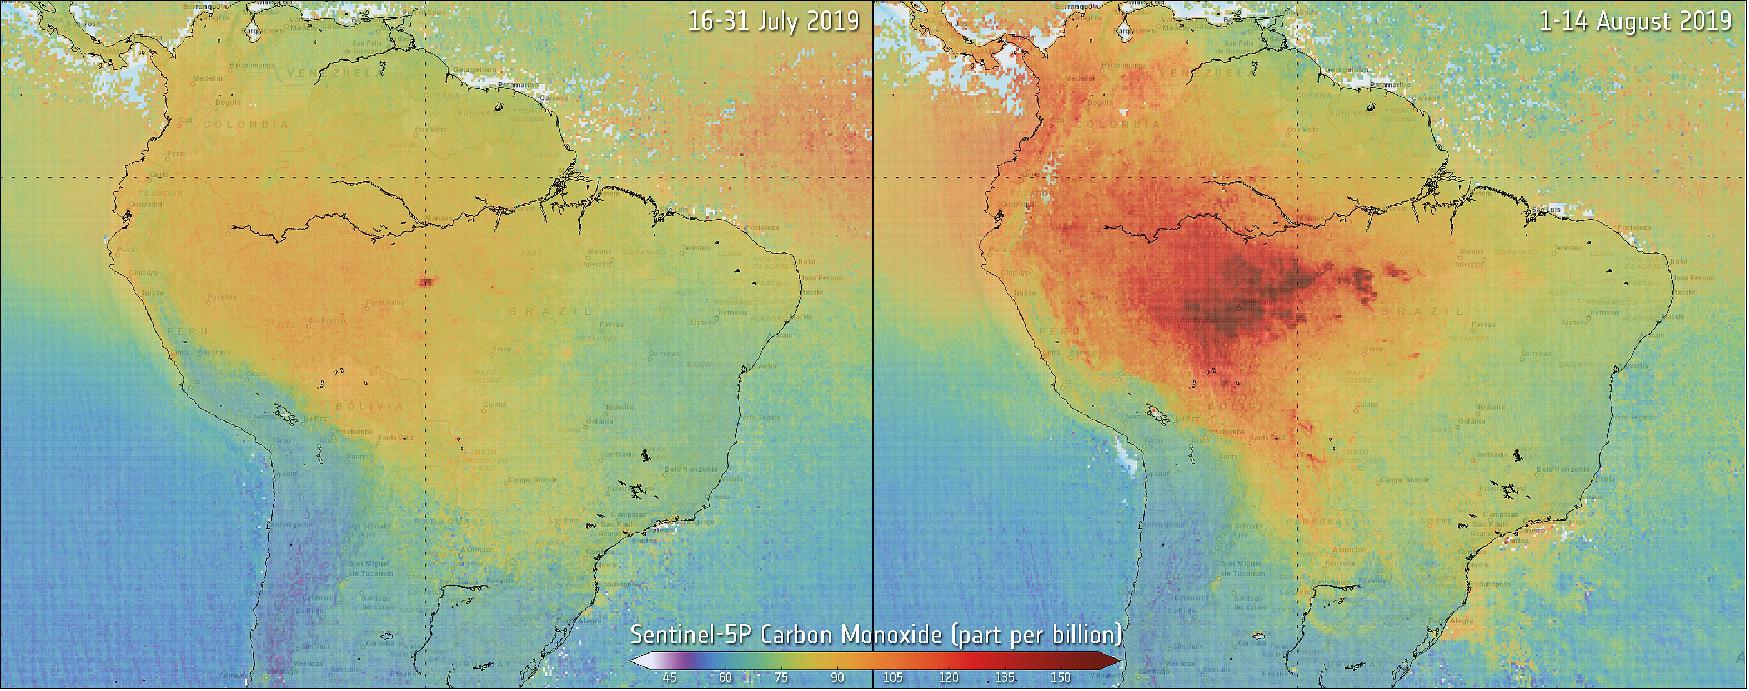 Figure 6: Using data from Copernicus Sentinel-5P, the image shows the difference in carbon monoxide in the air between July 2019 and August 2019 over the Amazon. This pollutant is often associated with traffic, but here we see the increase in atmospheric concentrations following the fires. Naturally, once in the air, it can cause problems for humans by reducing the amount of oxygen that can be transported in the bloodstream (image credit: ESA, the image contains modified Copernicus data (2019), processed by SRON)